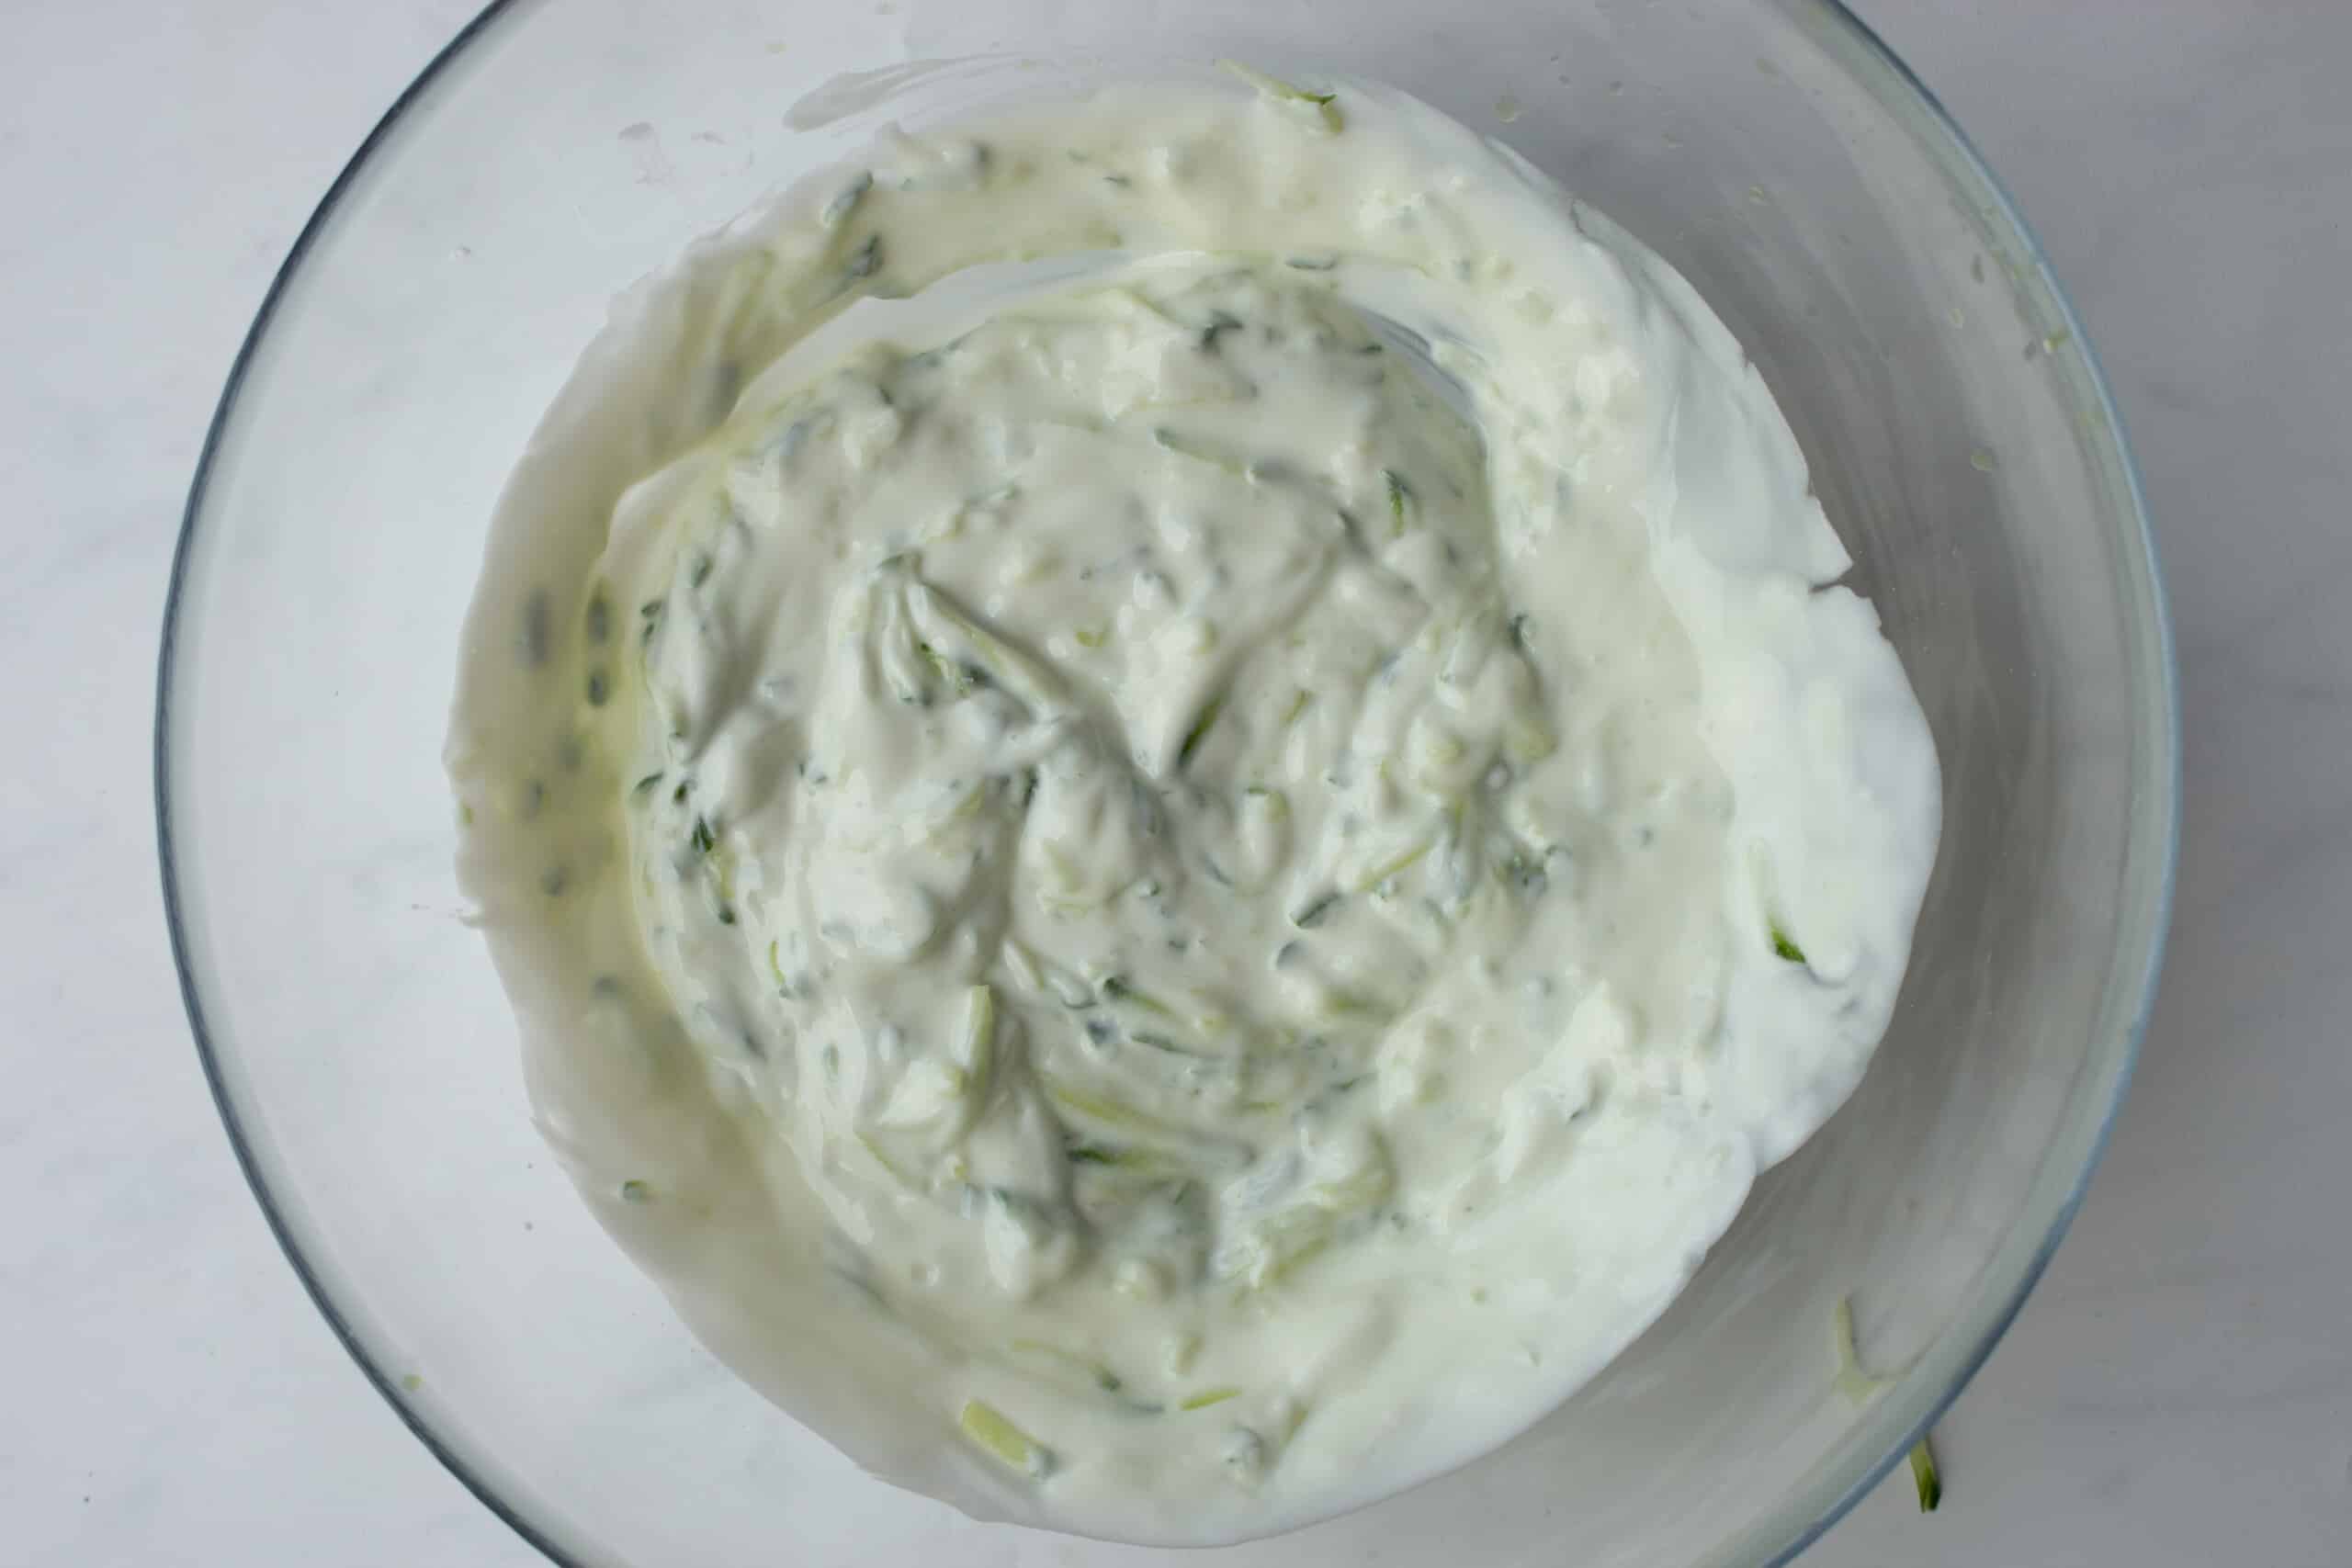 Grated cucumber and yogurt mixed together in a large glass bowl.